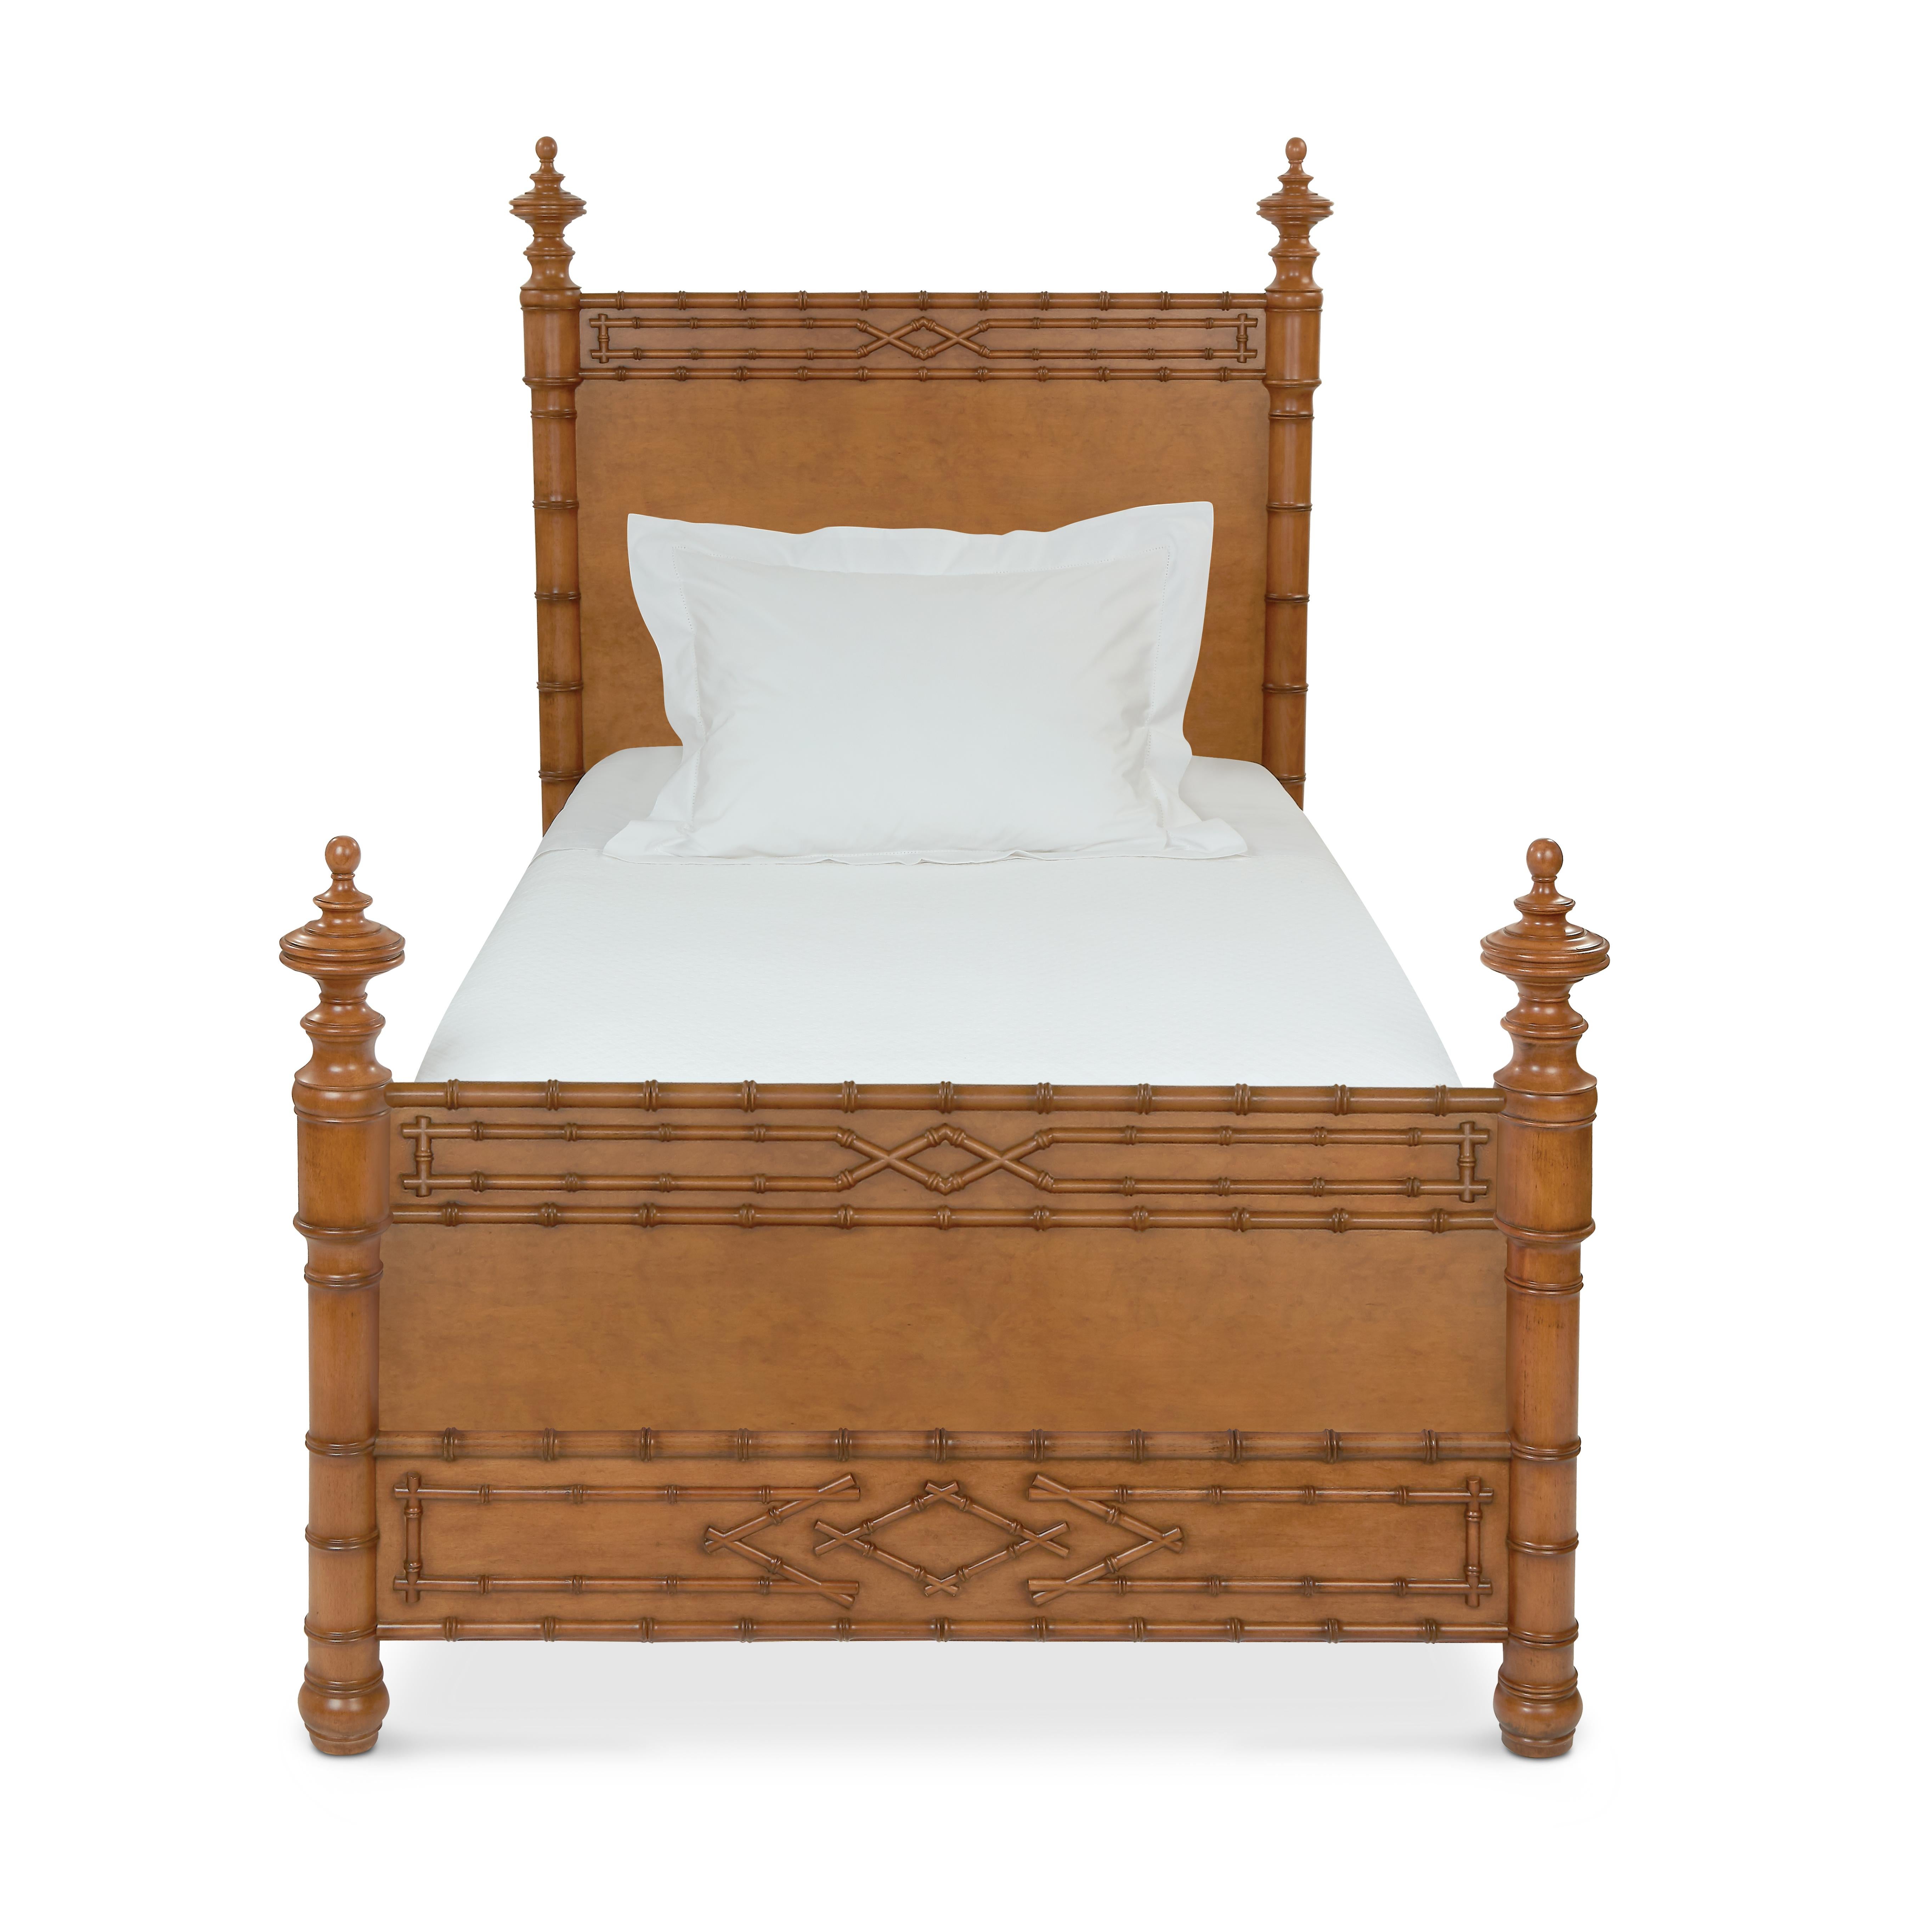 Faux bamboo has been a way to bring warmth and whimsy into the home since it gained popularity in mid-1800’s - the perfect counterpoint to heavy Victorian furniture. Our Bamboo Bed carries on the tradition, feeling both relaxed and sophisticated.